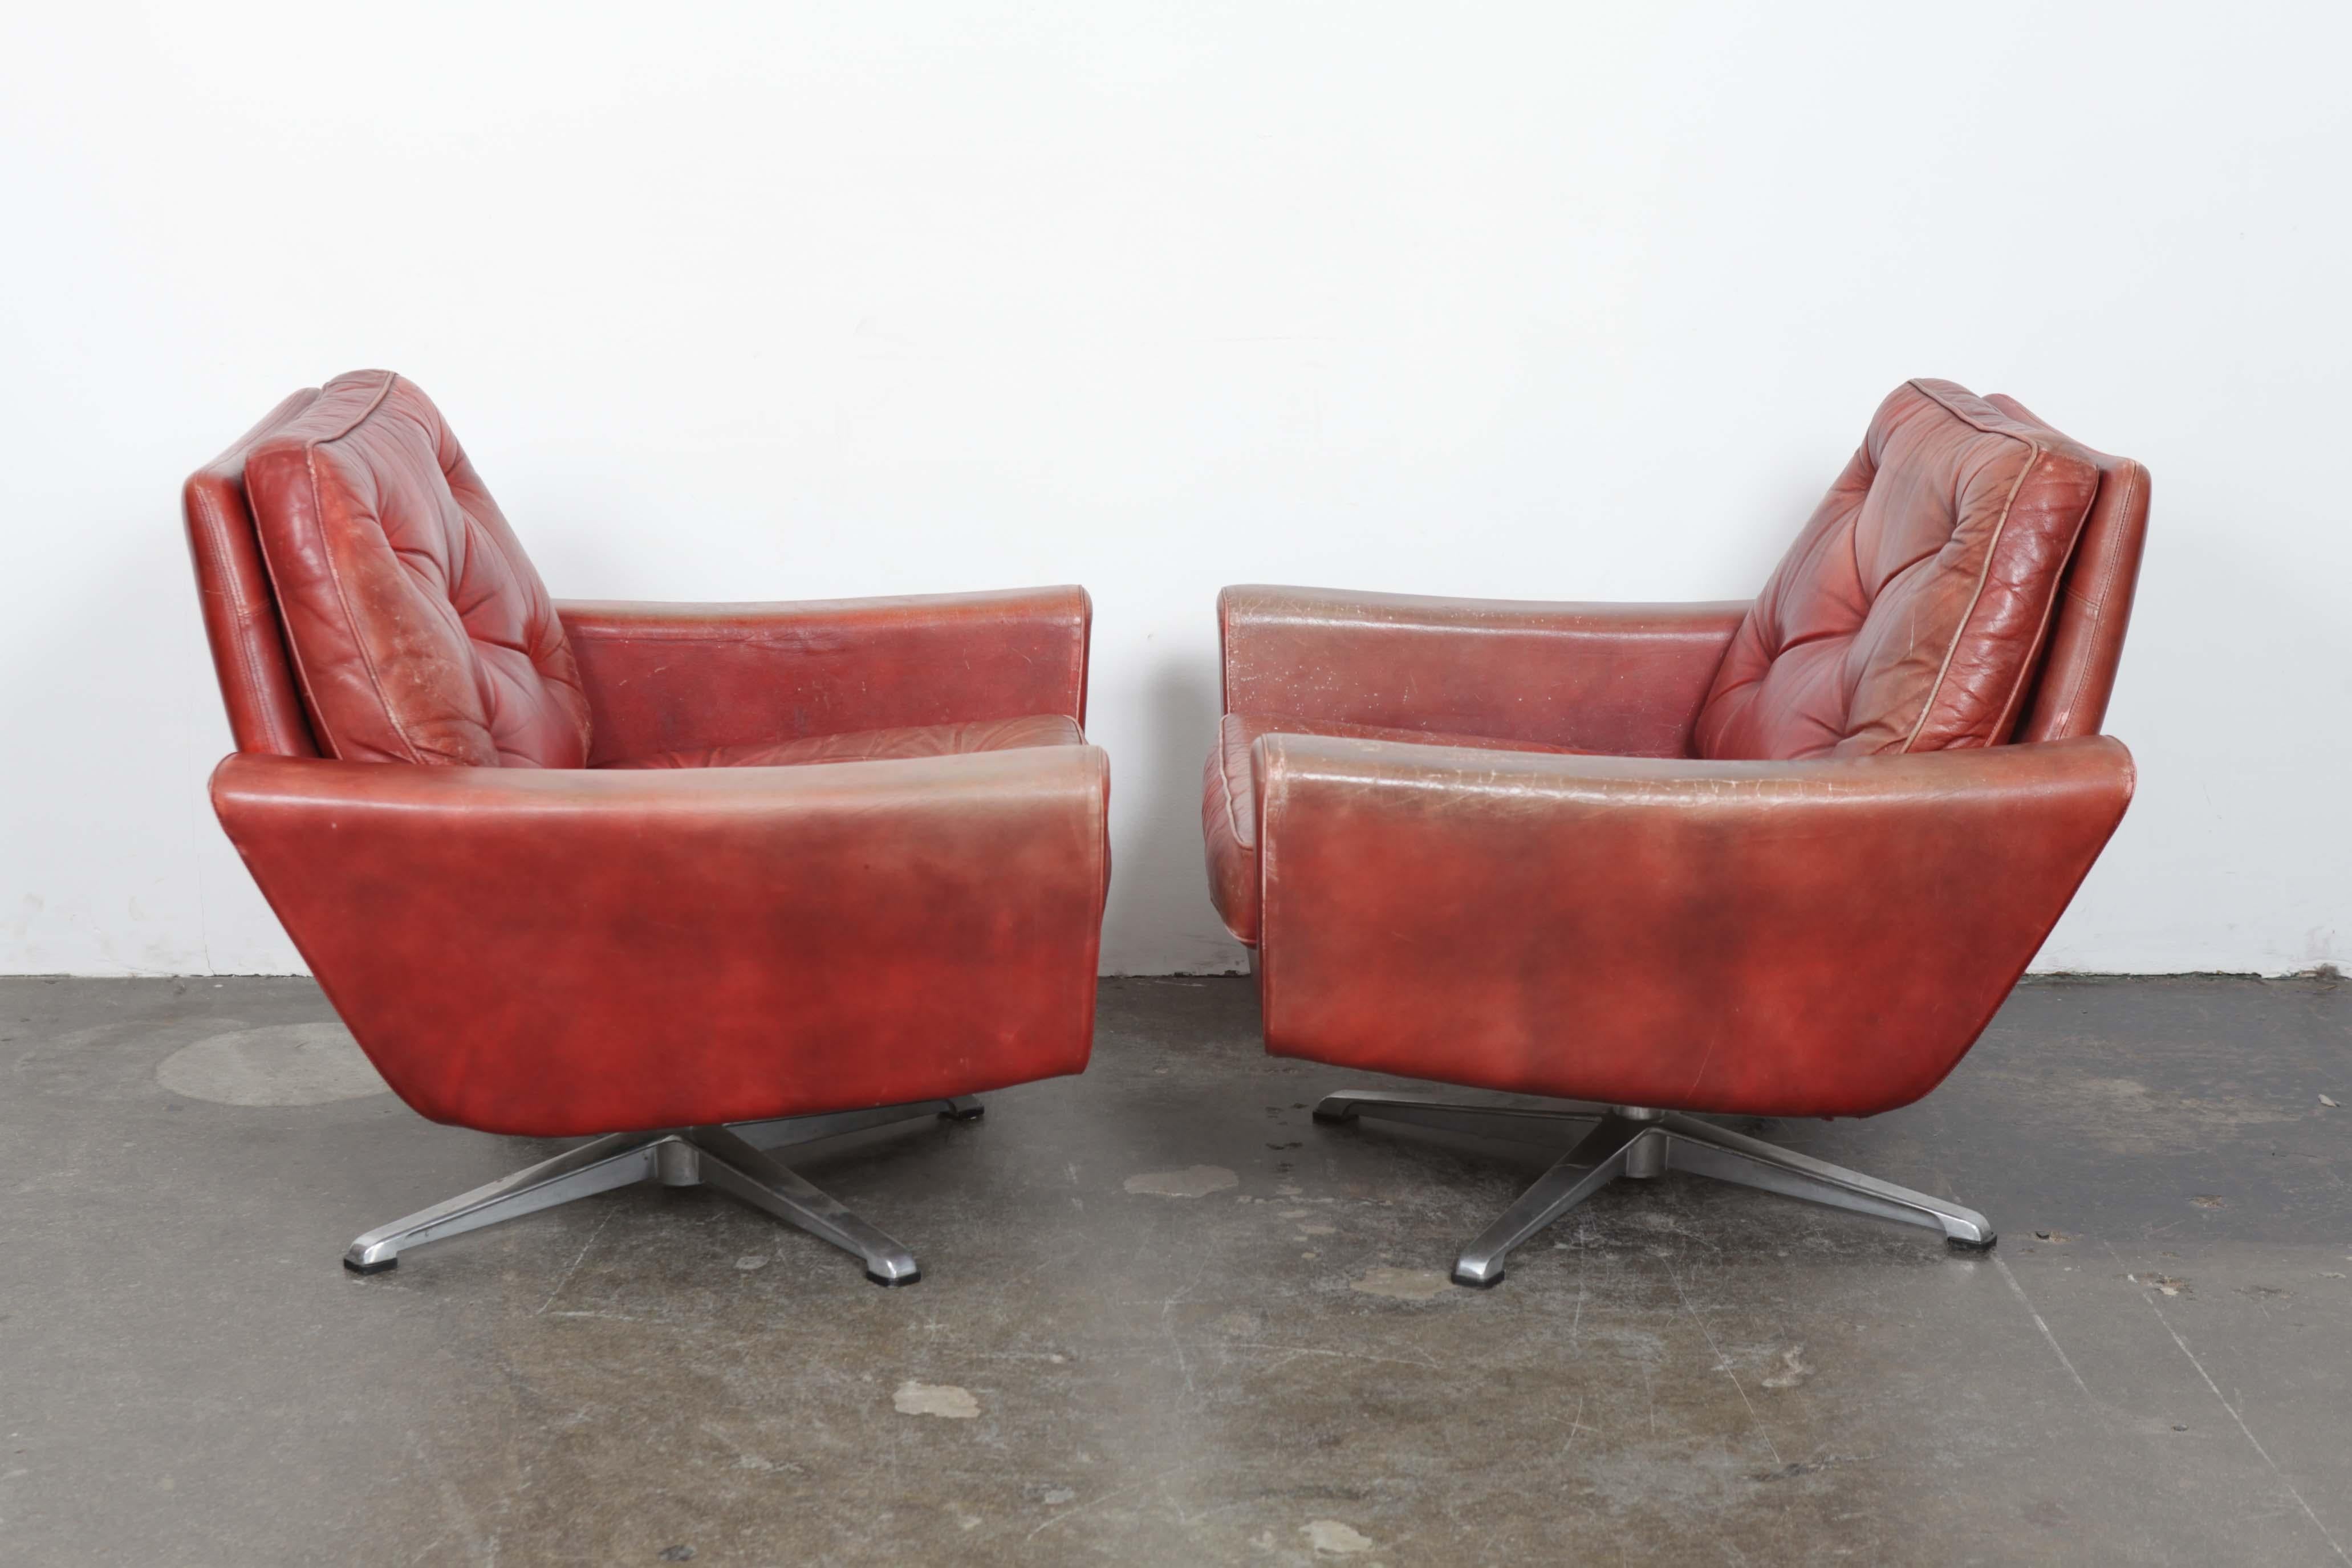 Pair of 1960s low swivel lounge chairs in original red tufted leather with incredible patina, made in Sweden. The swivel bases are a very solid metal base. The leather shows definite signs of patina/wear/scratches. Back and seat cushion are both